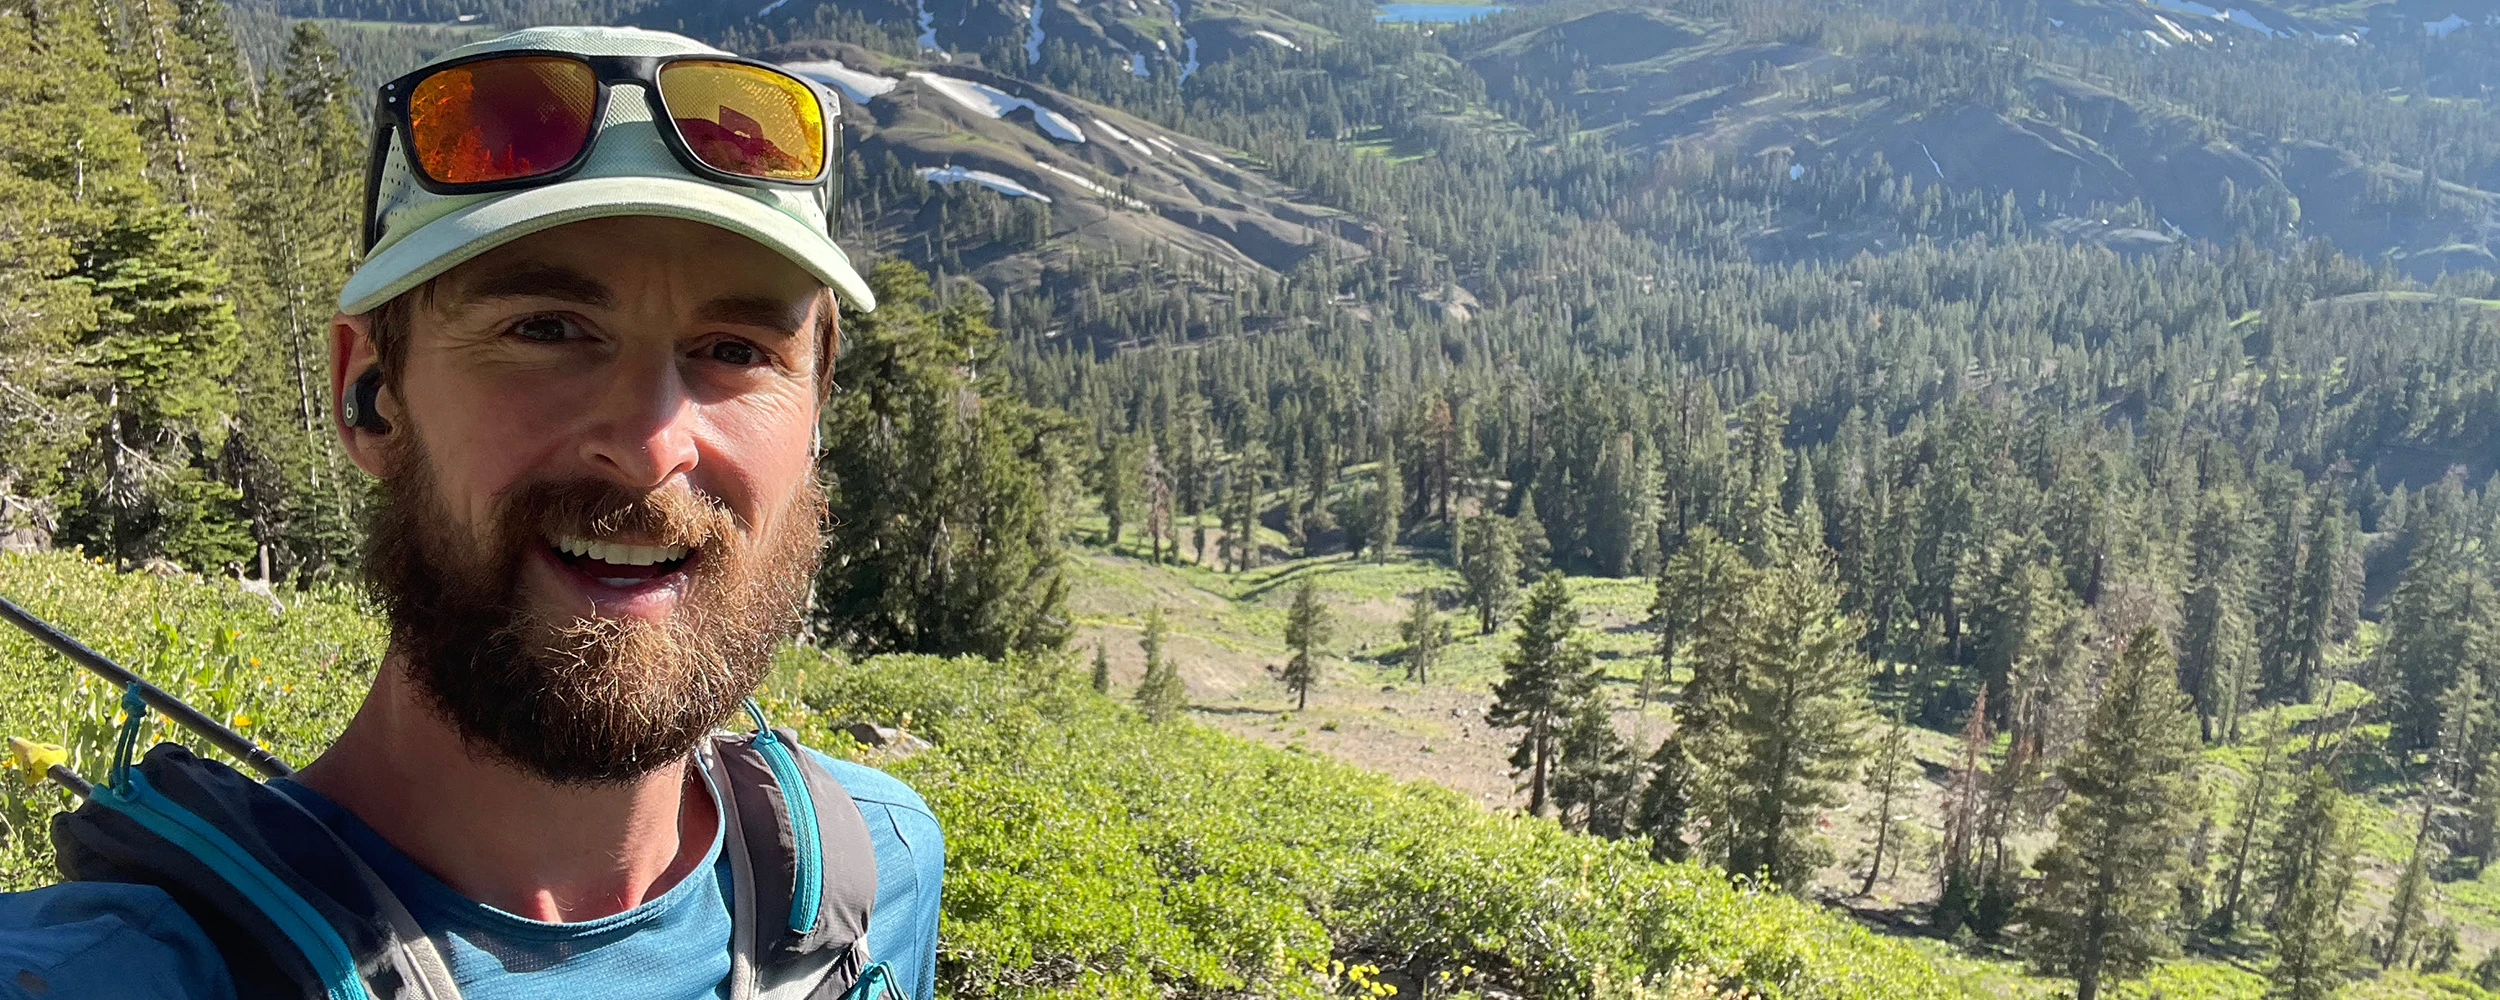 Santa Cruz Mountains resident conquers legendary Pacific Crest Trail in  solo hike